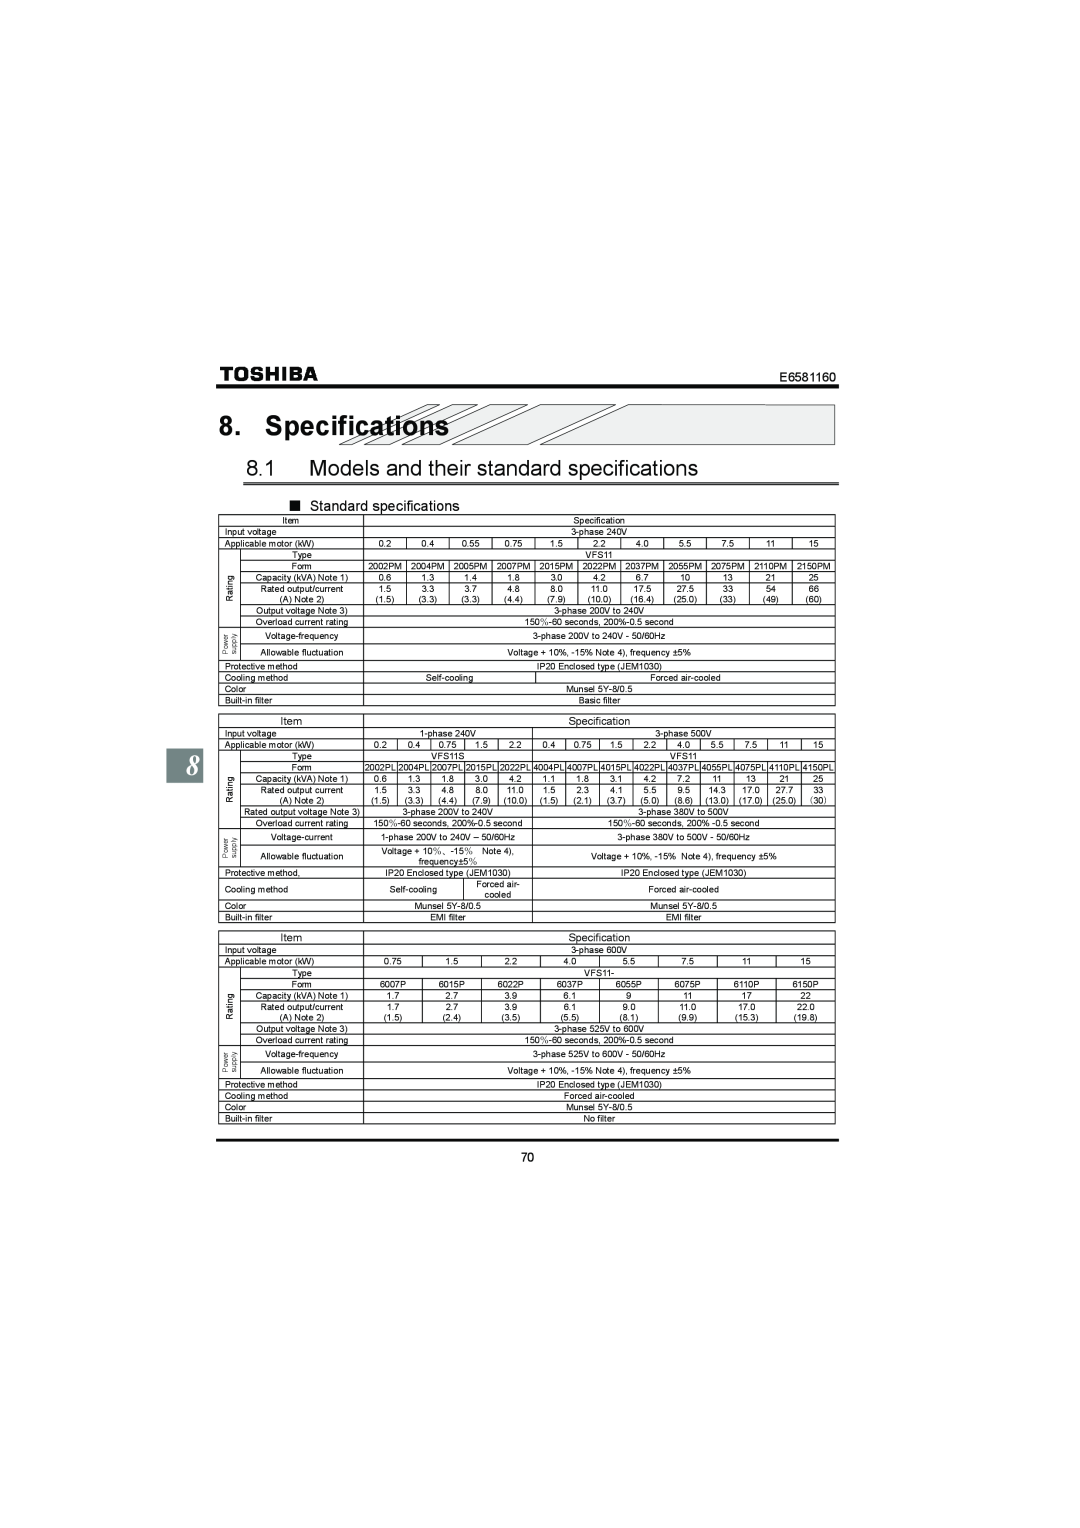 Toshiba VF-S11 manual Specifications, 8.1Models and their standard specifications, E6581160 